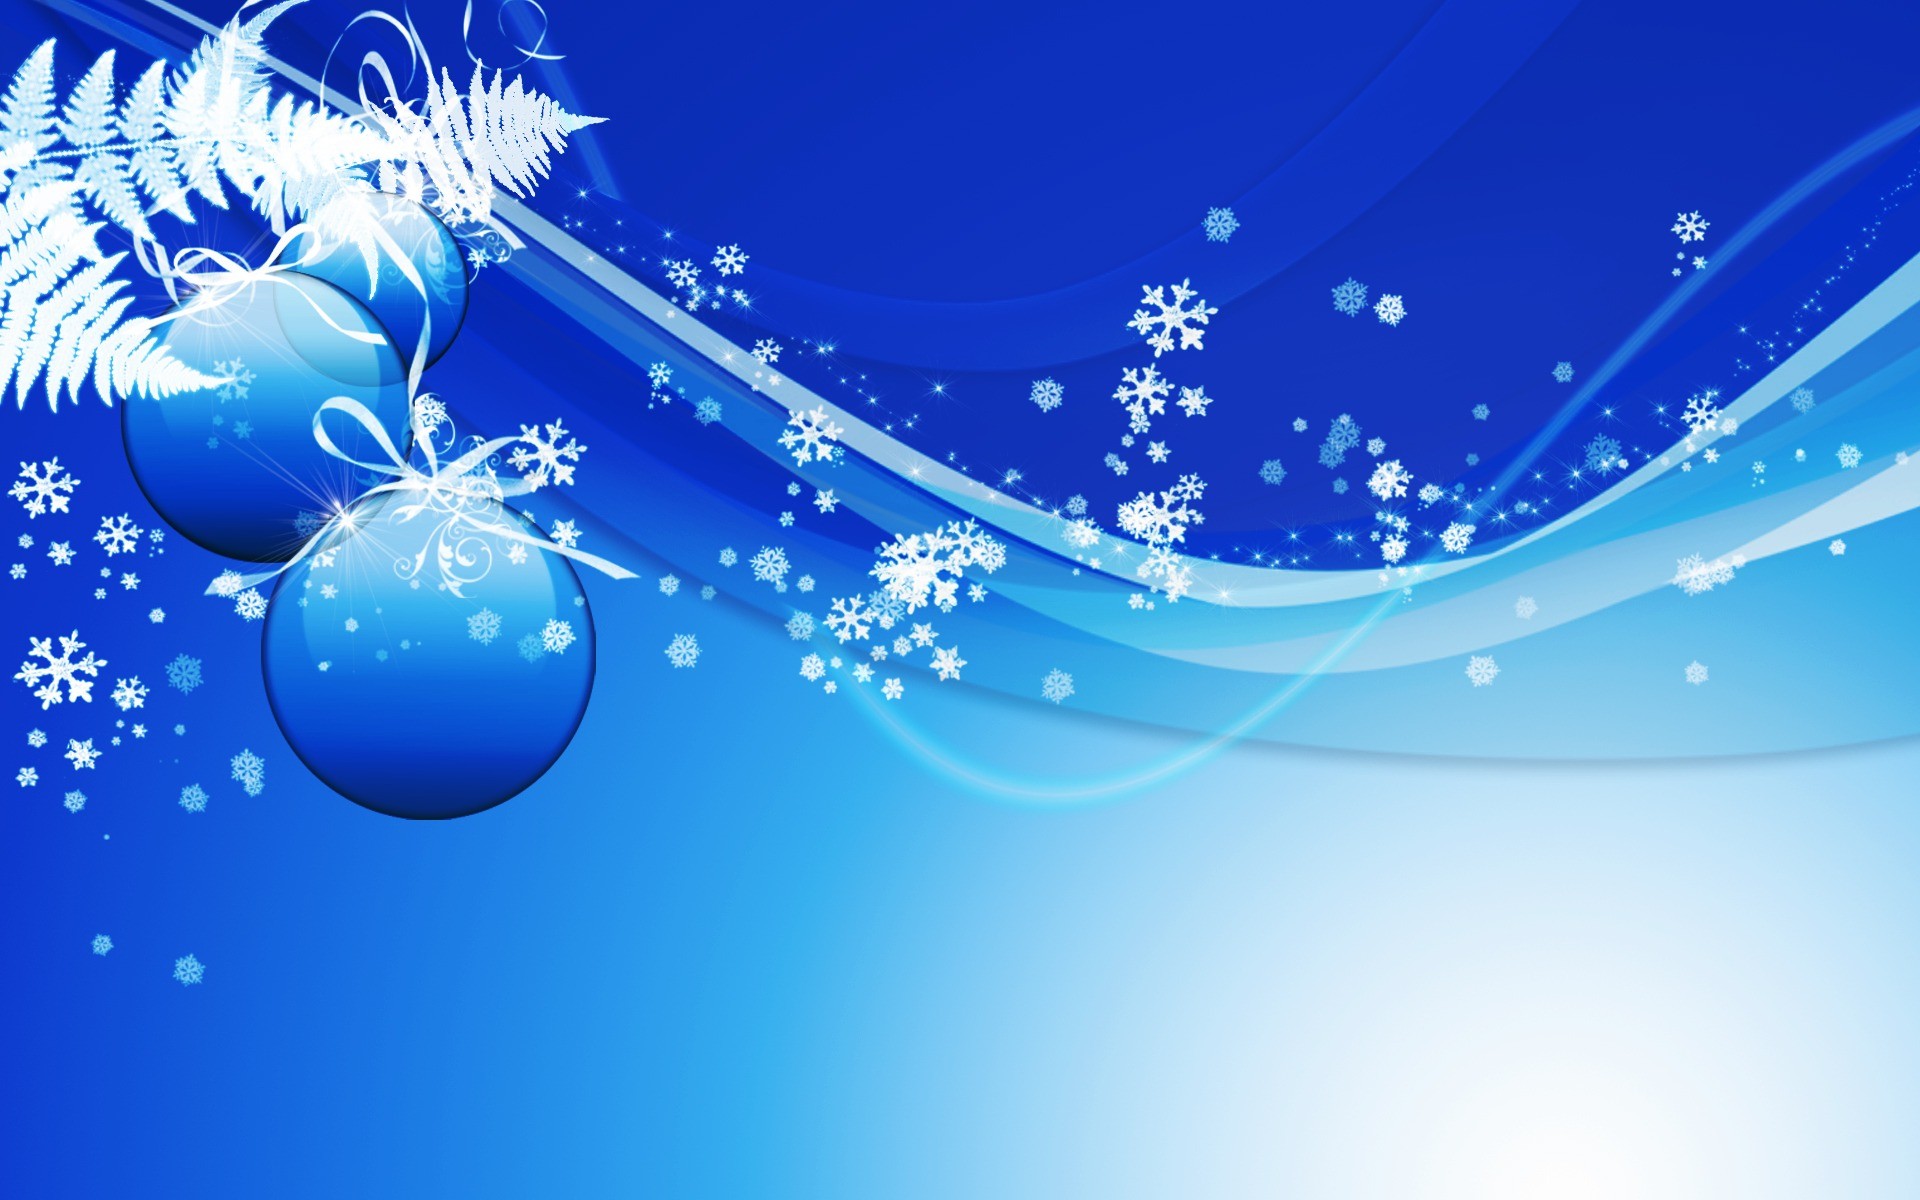 1920x1200 Go back to Free Christmas Wallpapers and Screensavers Next Image .